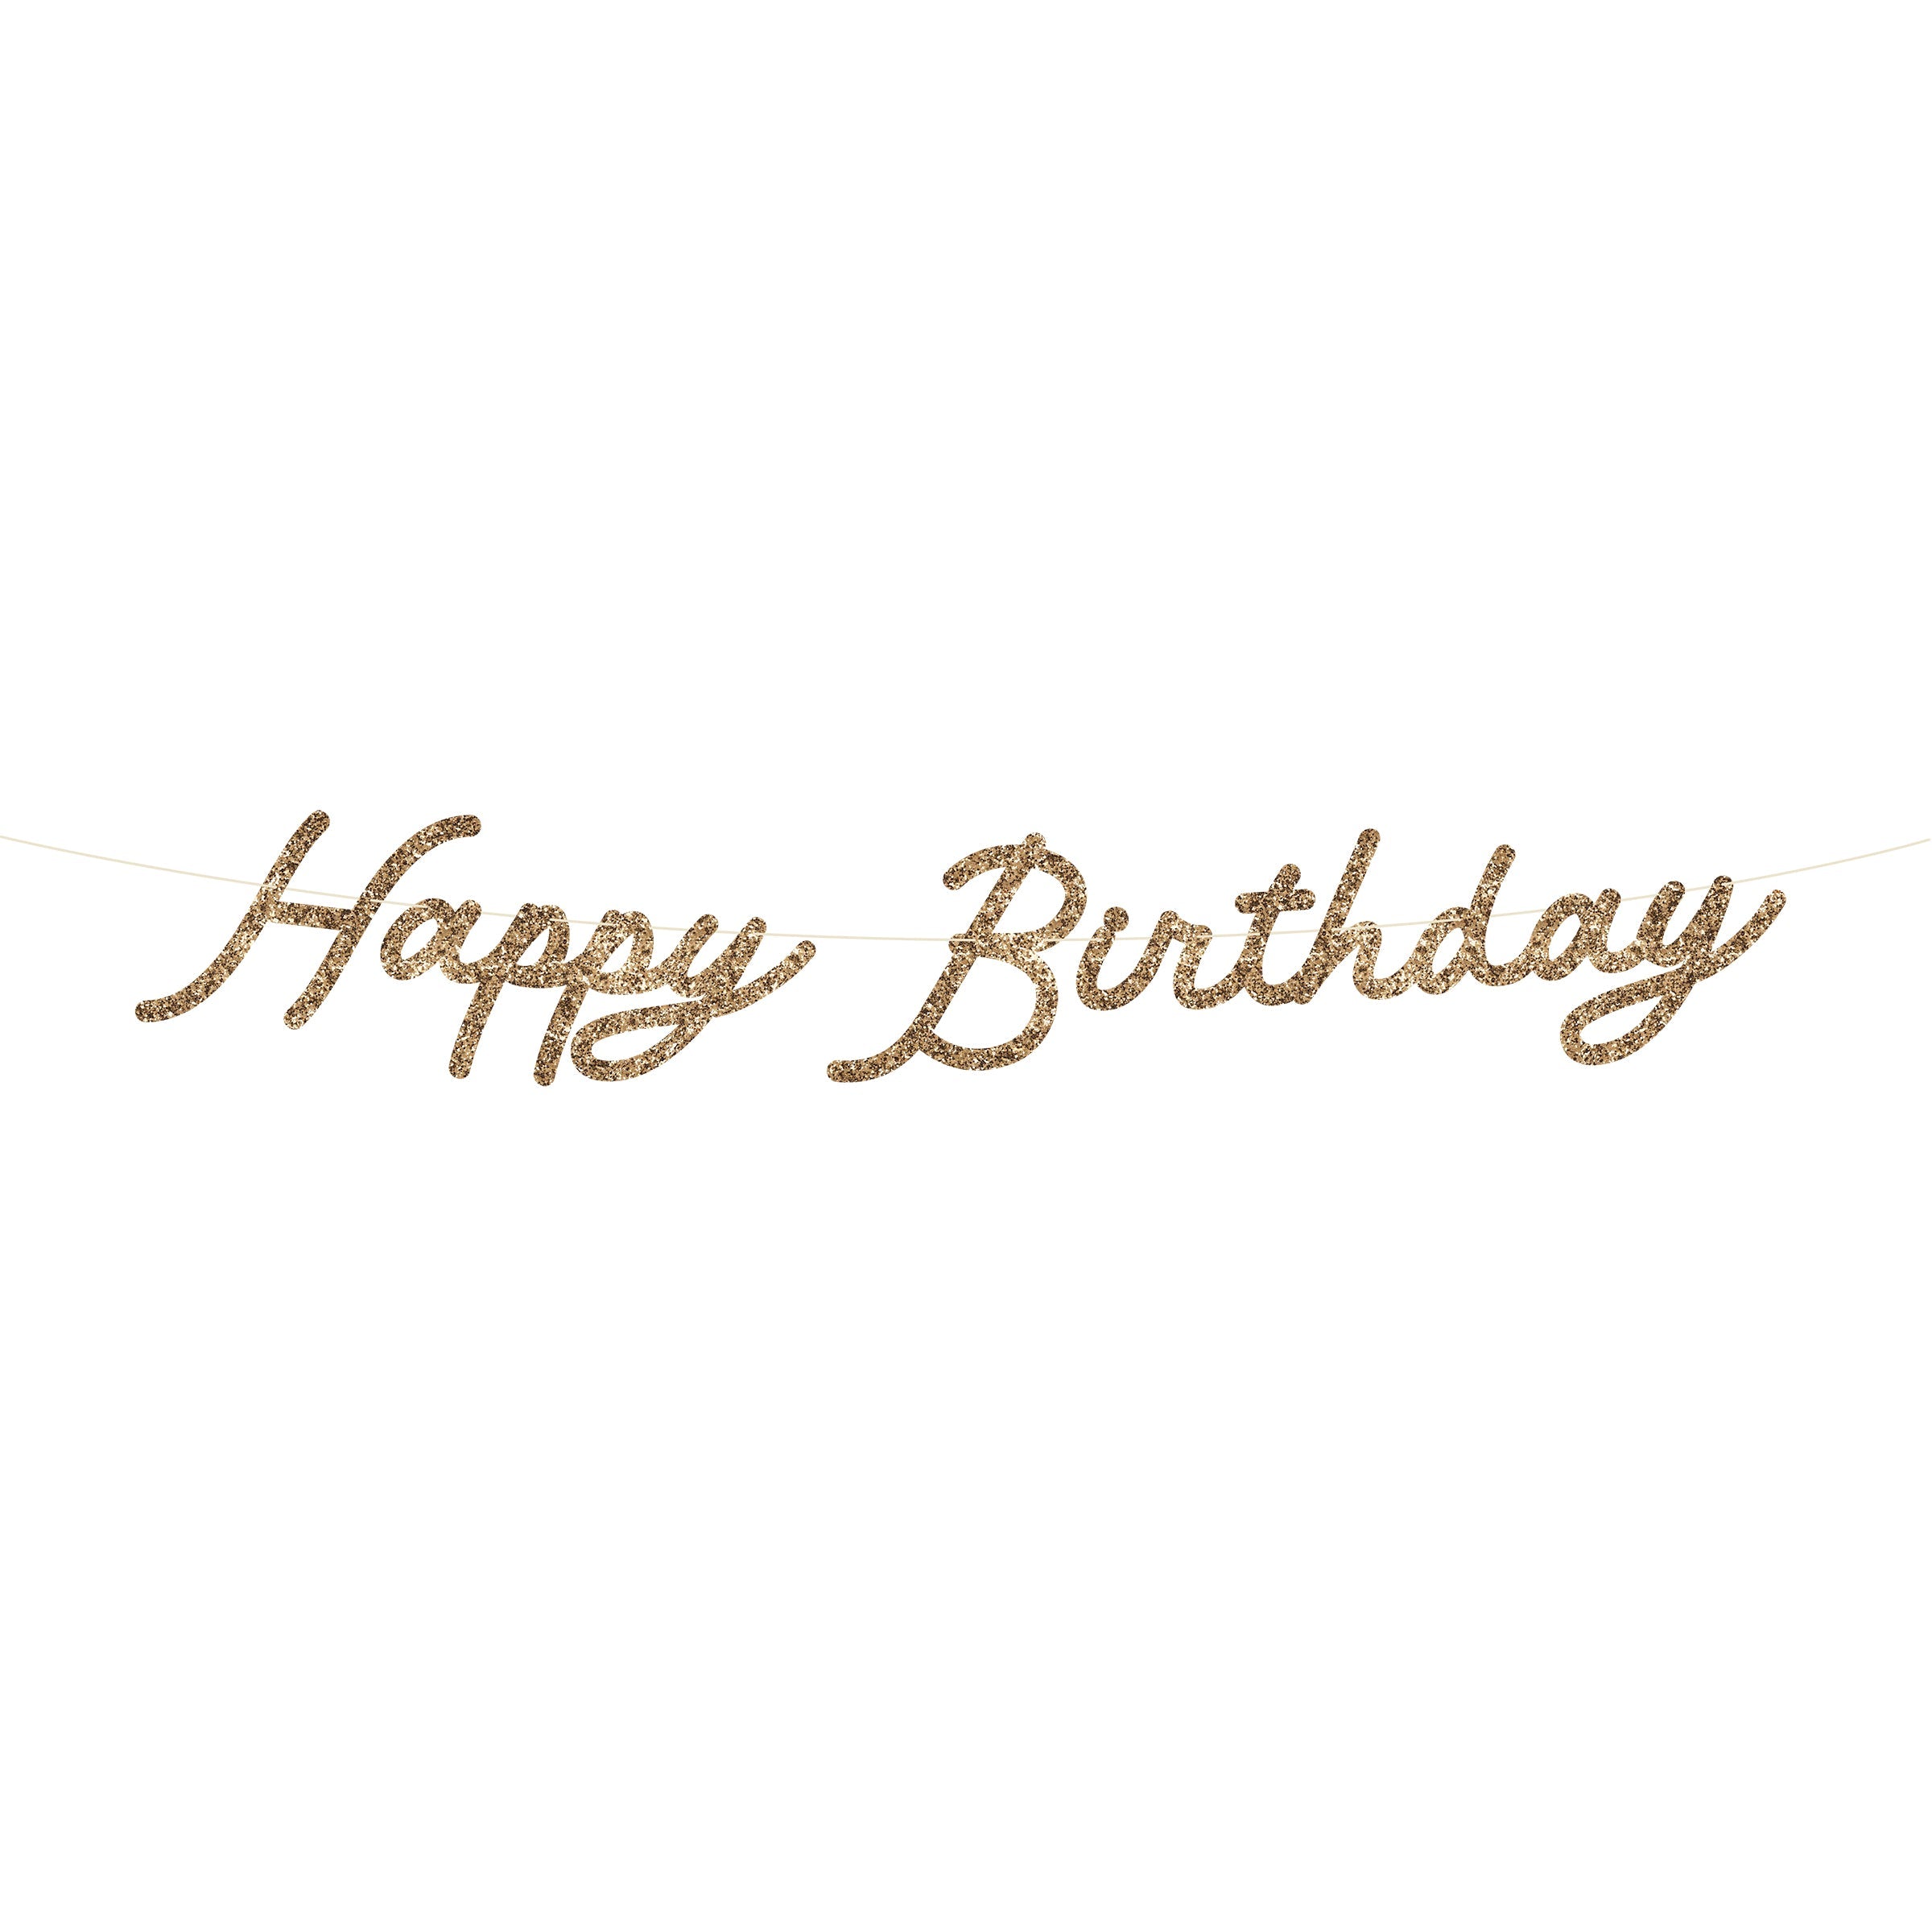 If you're looking for gold happy birthday decorations you'll love our paper garland.